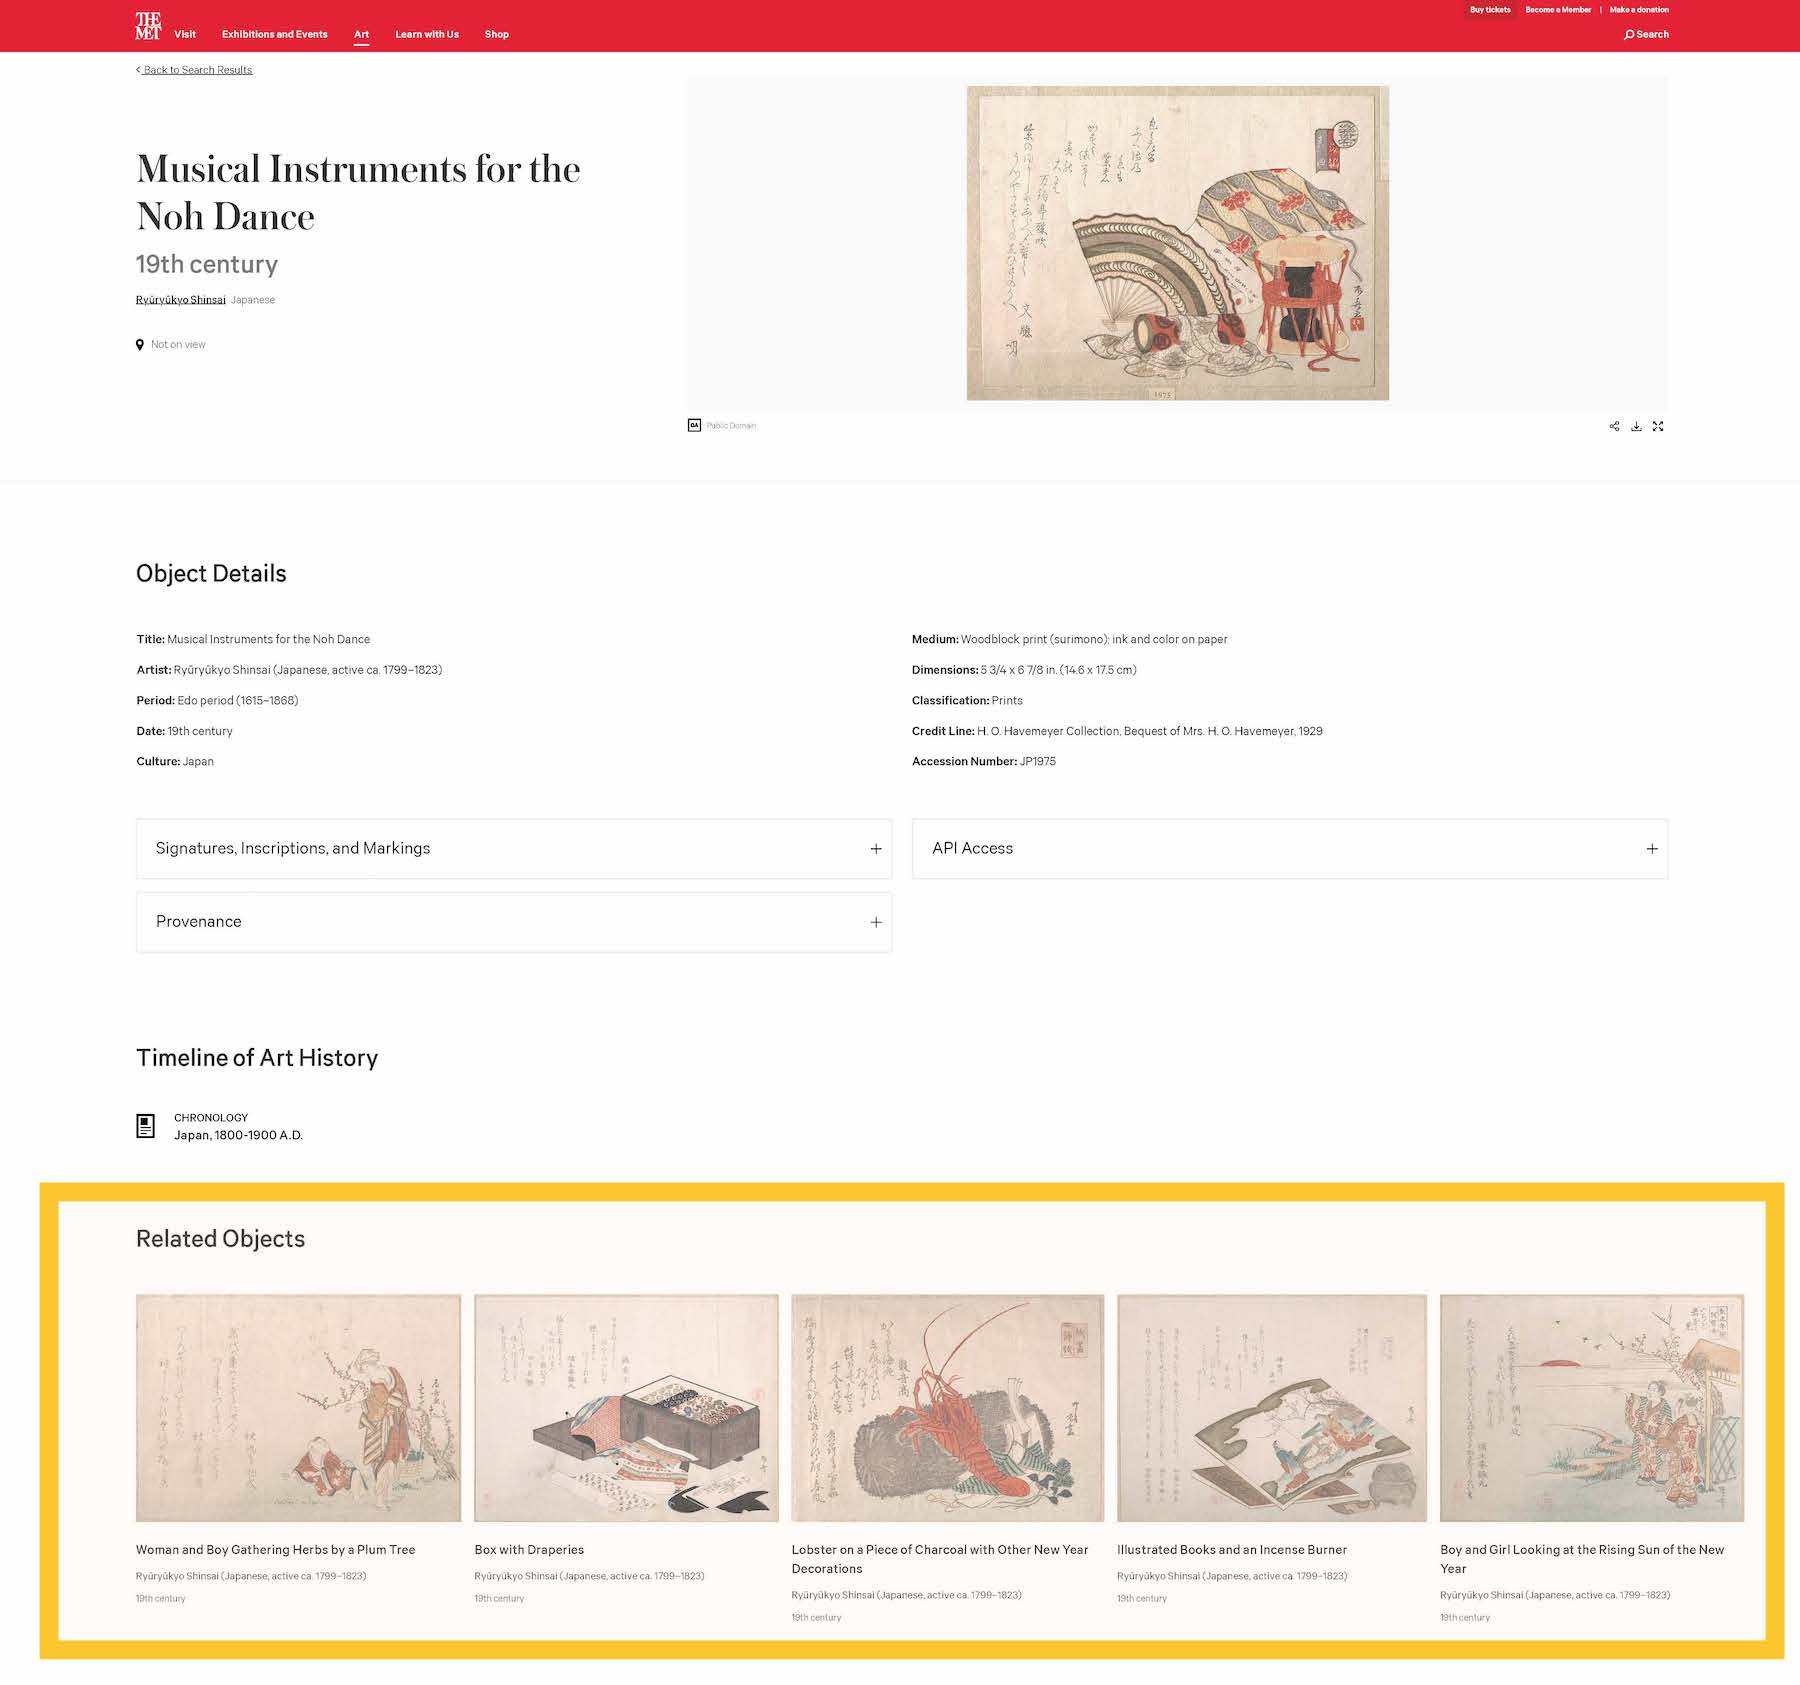 Screenshot of a page on the Metropolitan Museum of Art website for a print on paper titled “Musical Instruments for the Noh Dance” which depicts two hourglass-shaped drums, a scroll, a paper fan, and some fabric. The bottom of the page shows a section highlighted in yellow titled Related Objects in which there is a row of five images of other Japanese prints.